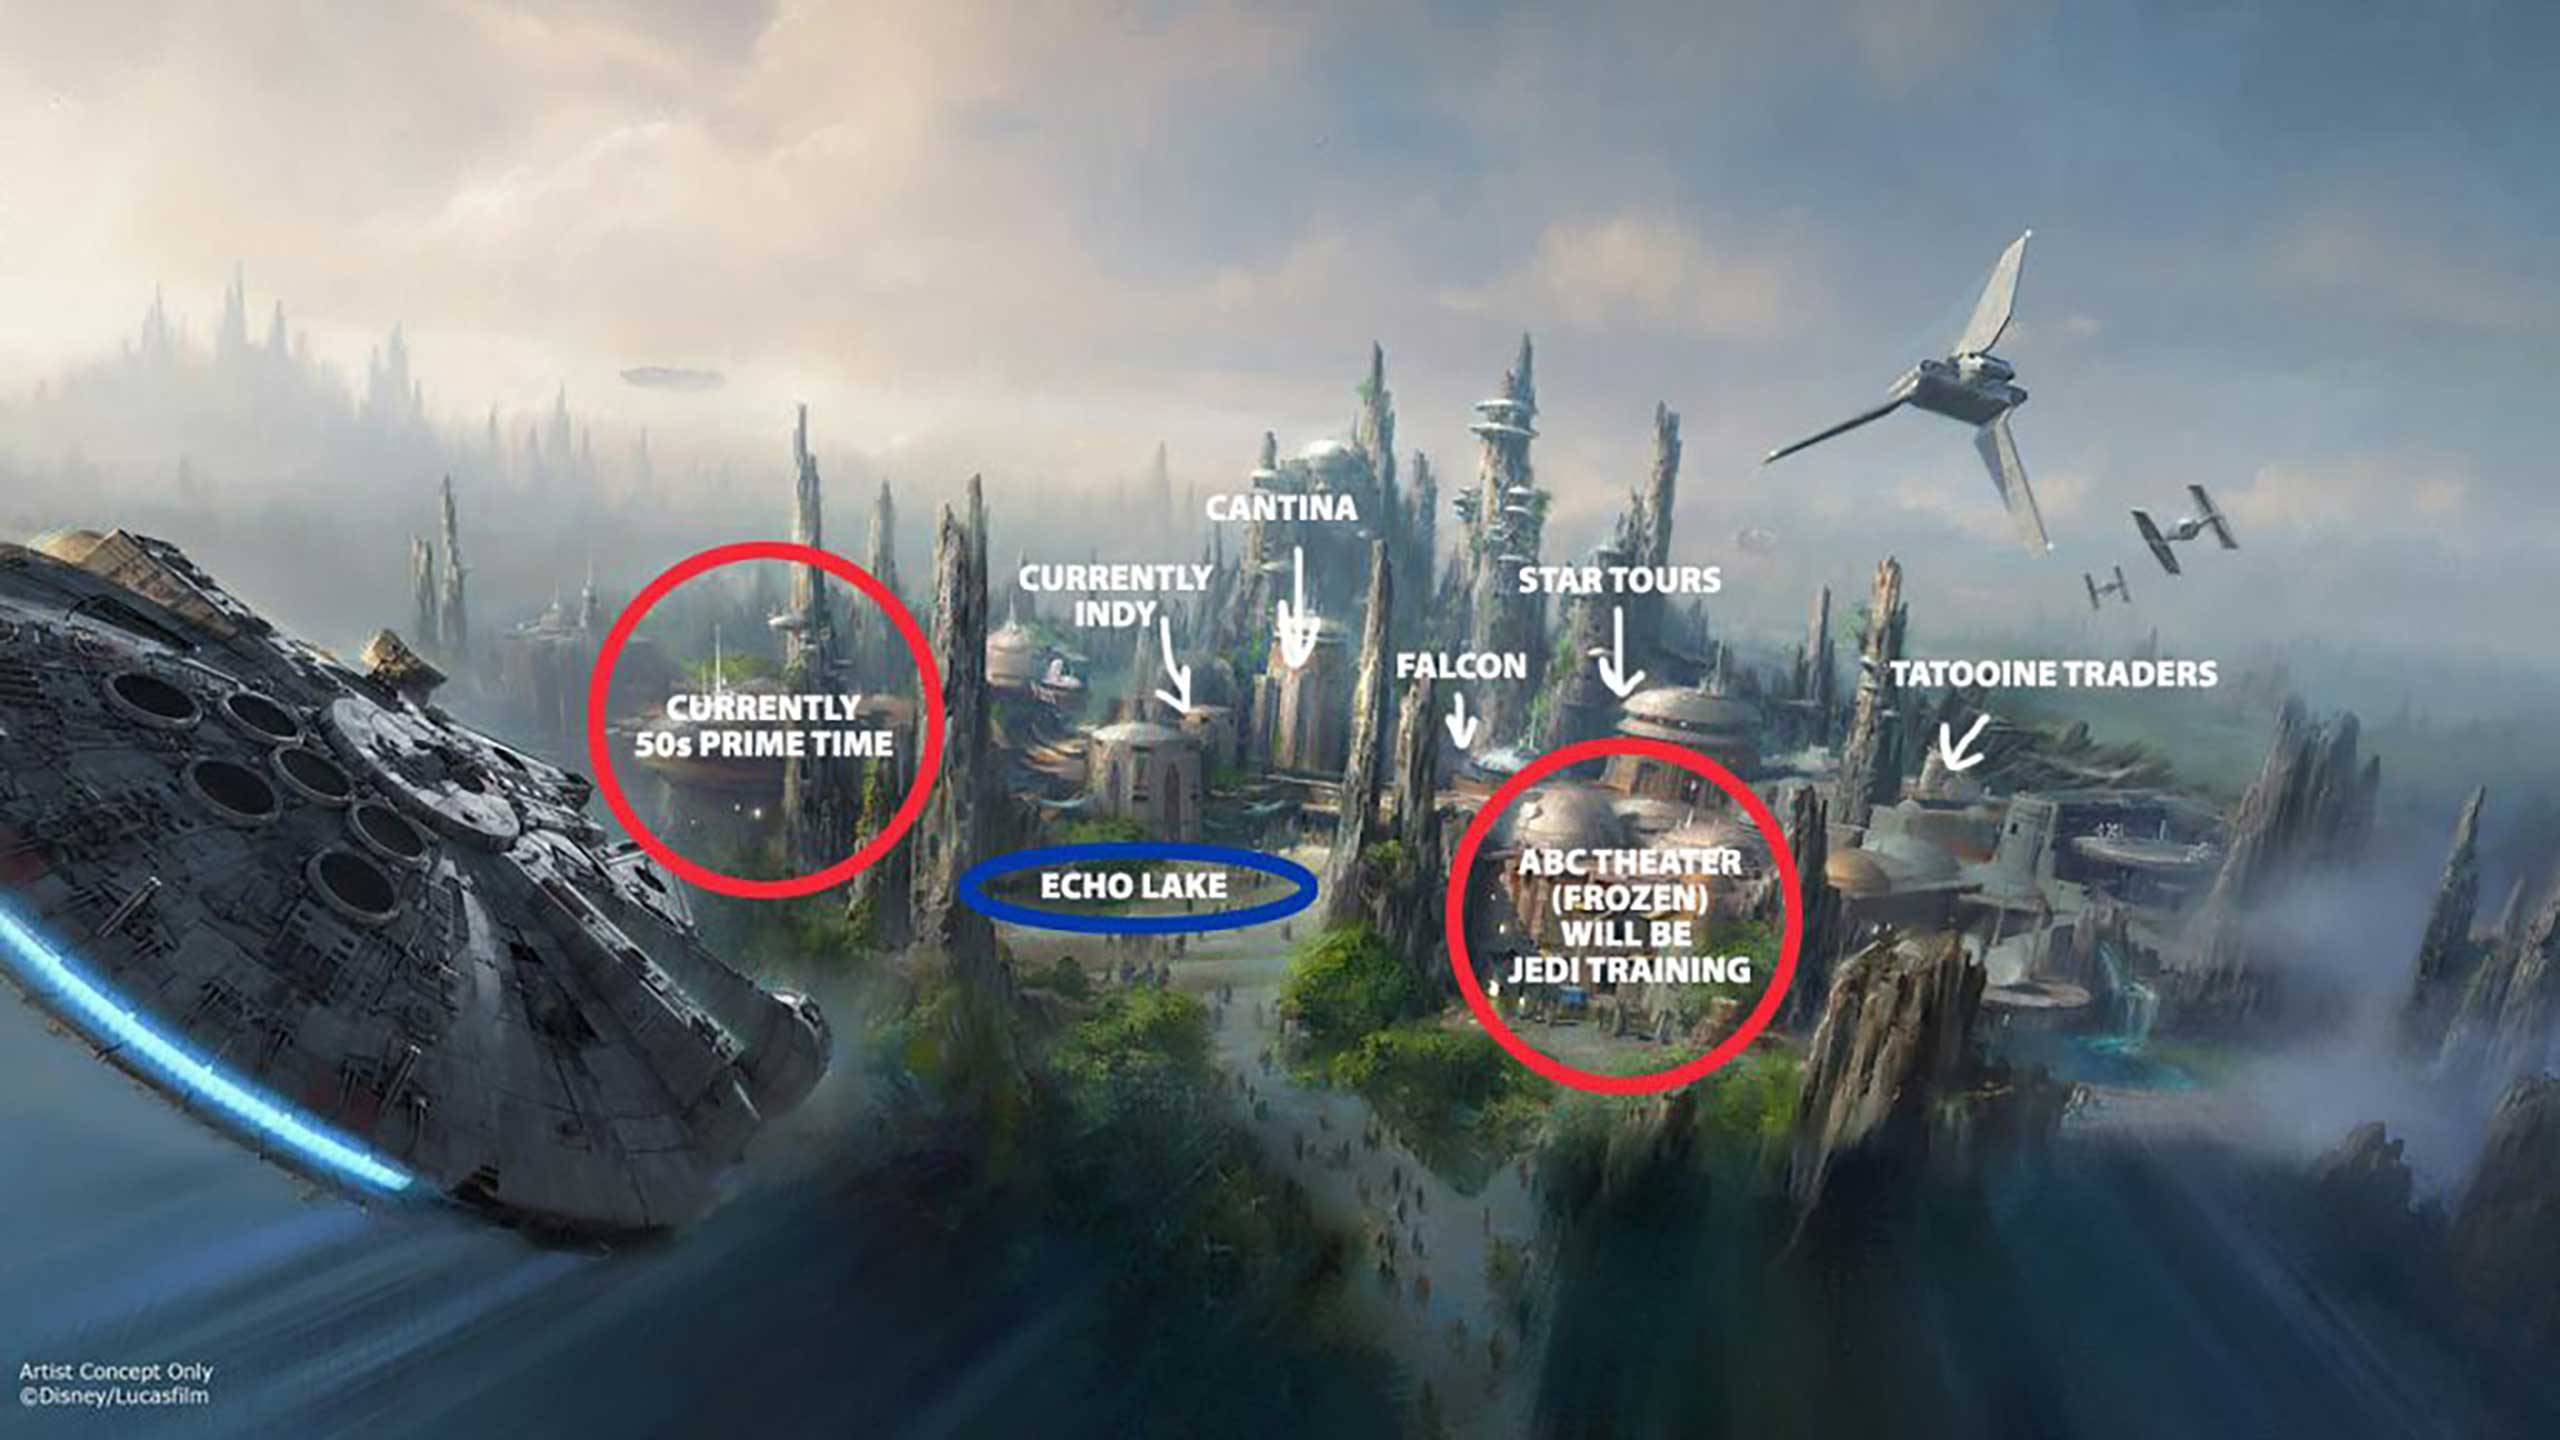 Possible Star Wars Land layout at Disney's Hollywood Studios. By Ignohippo.